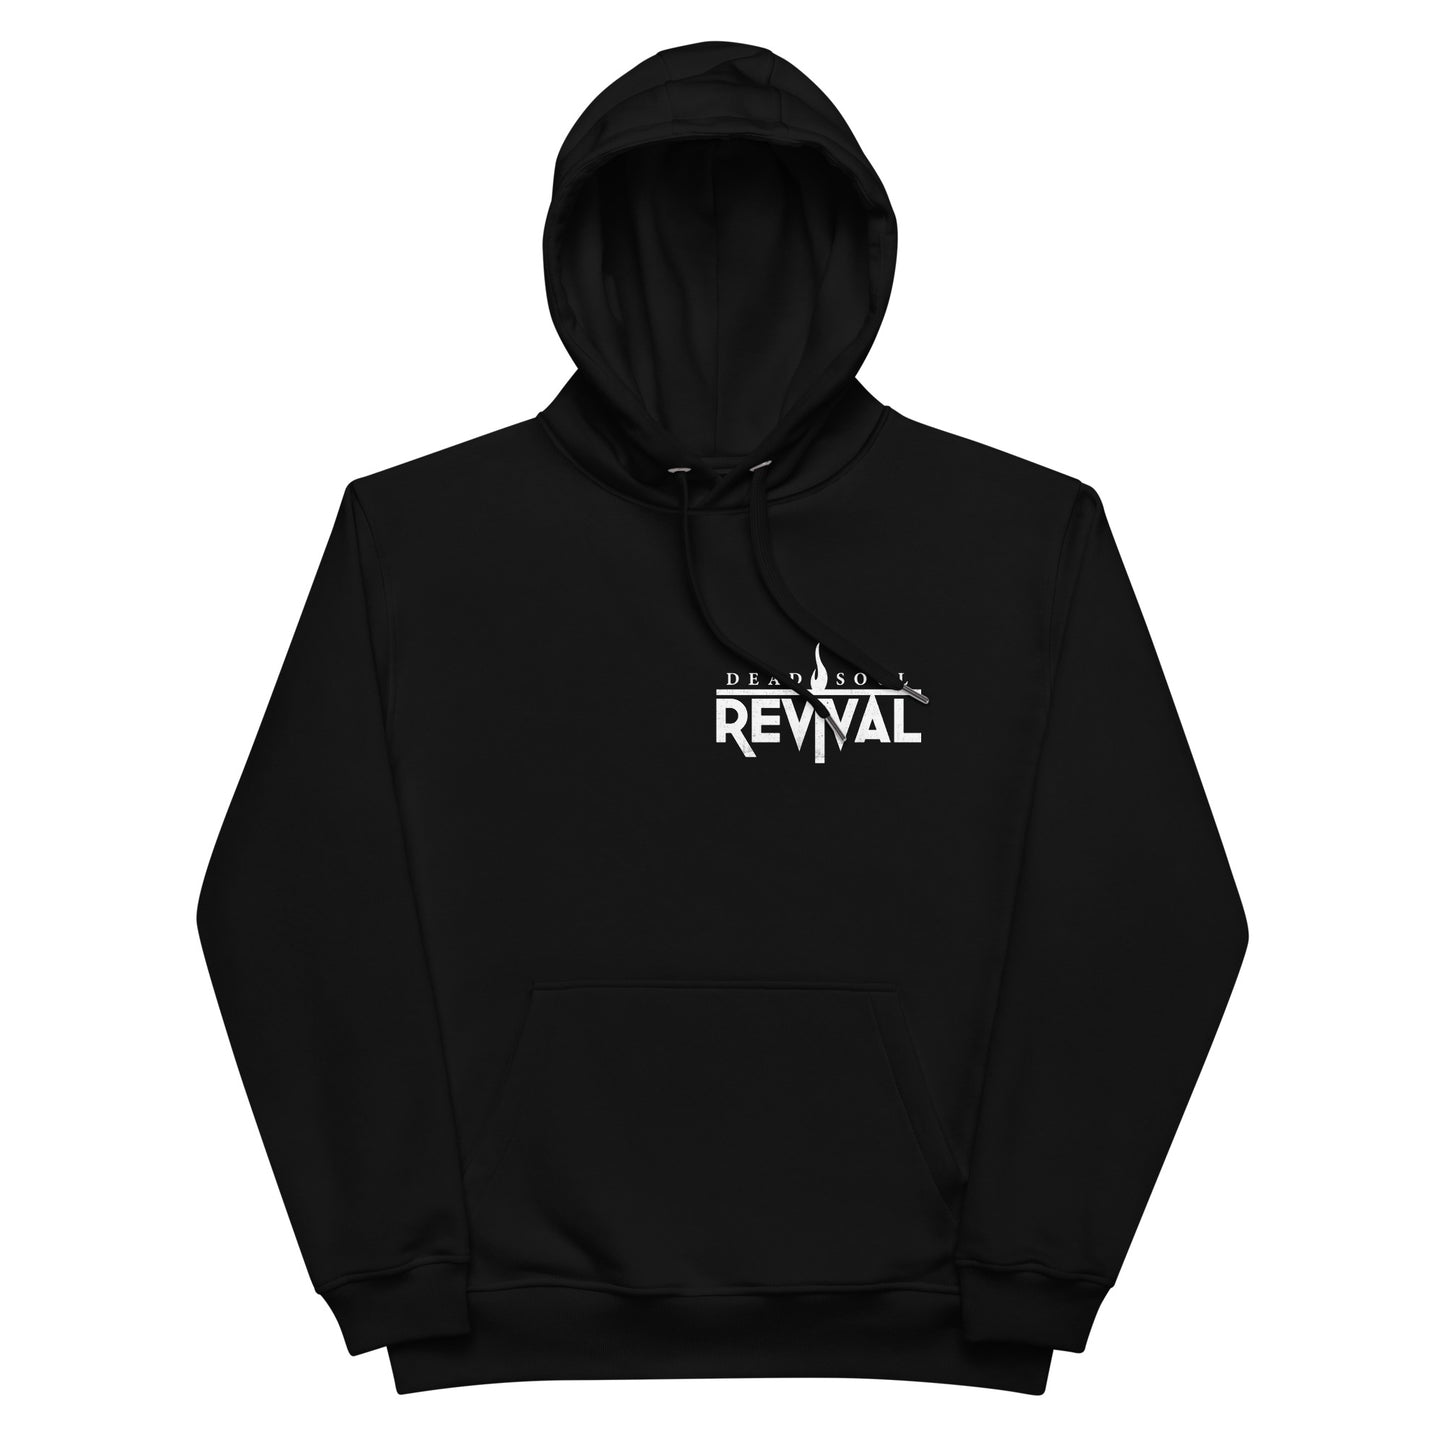 Premium eco hoodie with logo front and back